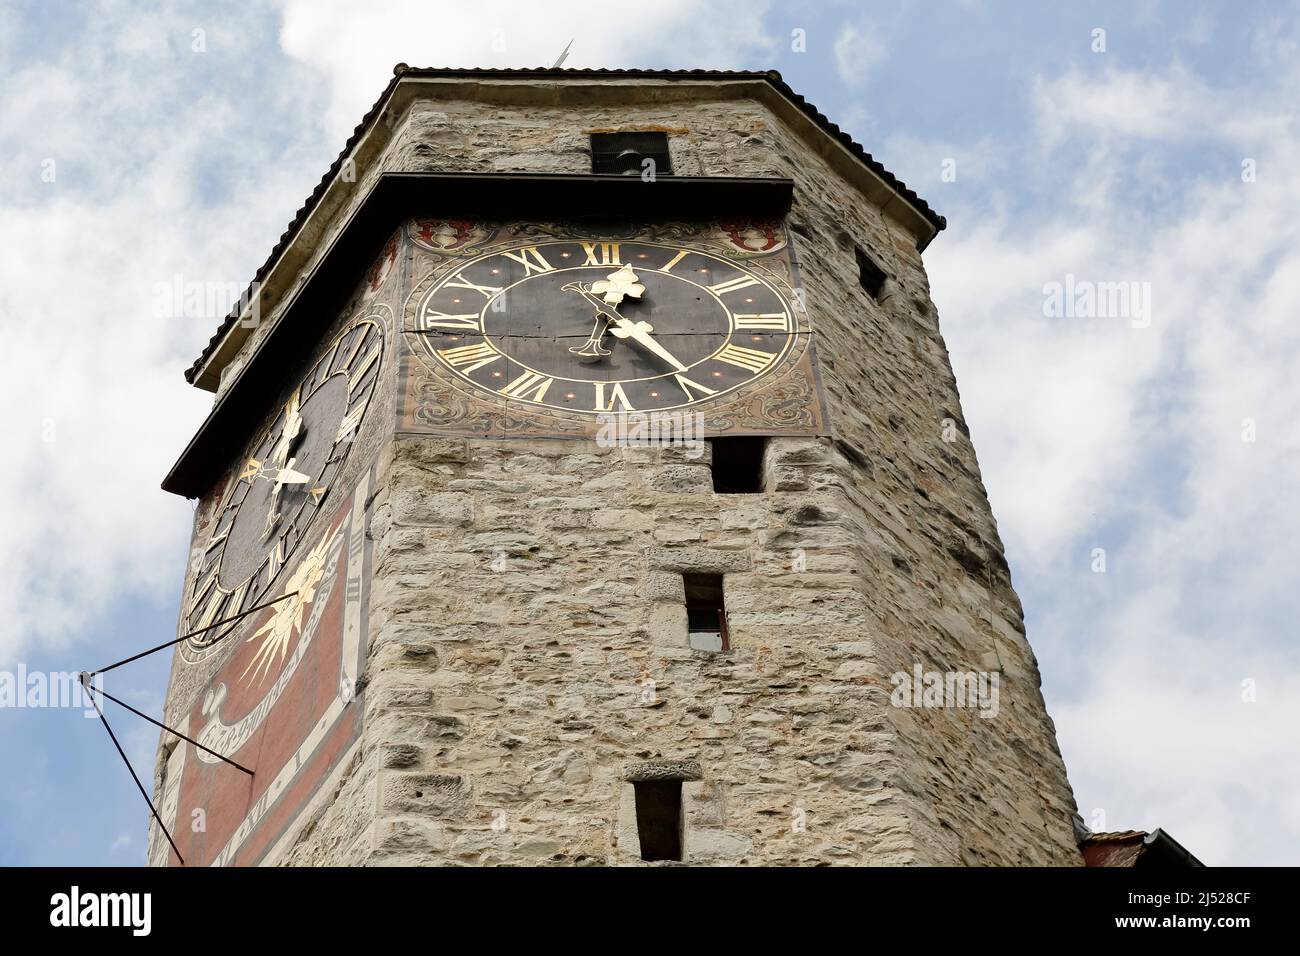 Rapperswil, Switzerland - May 10, 2016: Built of stone the Clock Tower is shown up close. It is a part of the Castle that was built in the early 13th Stock Photo